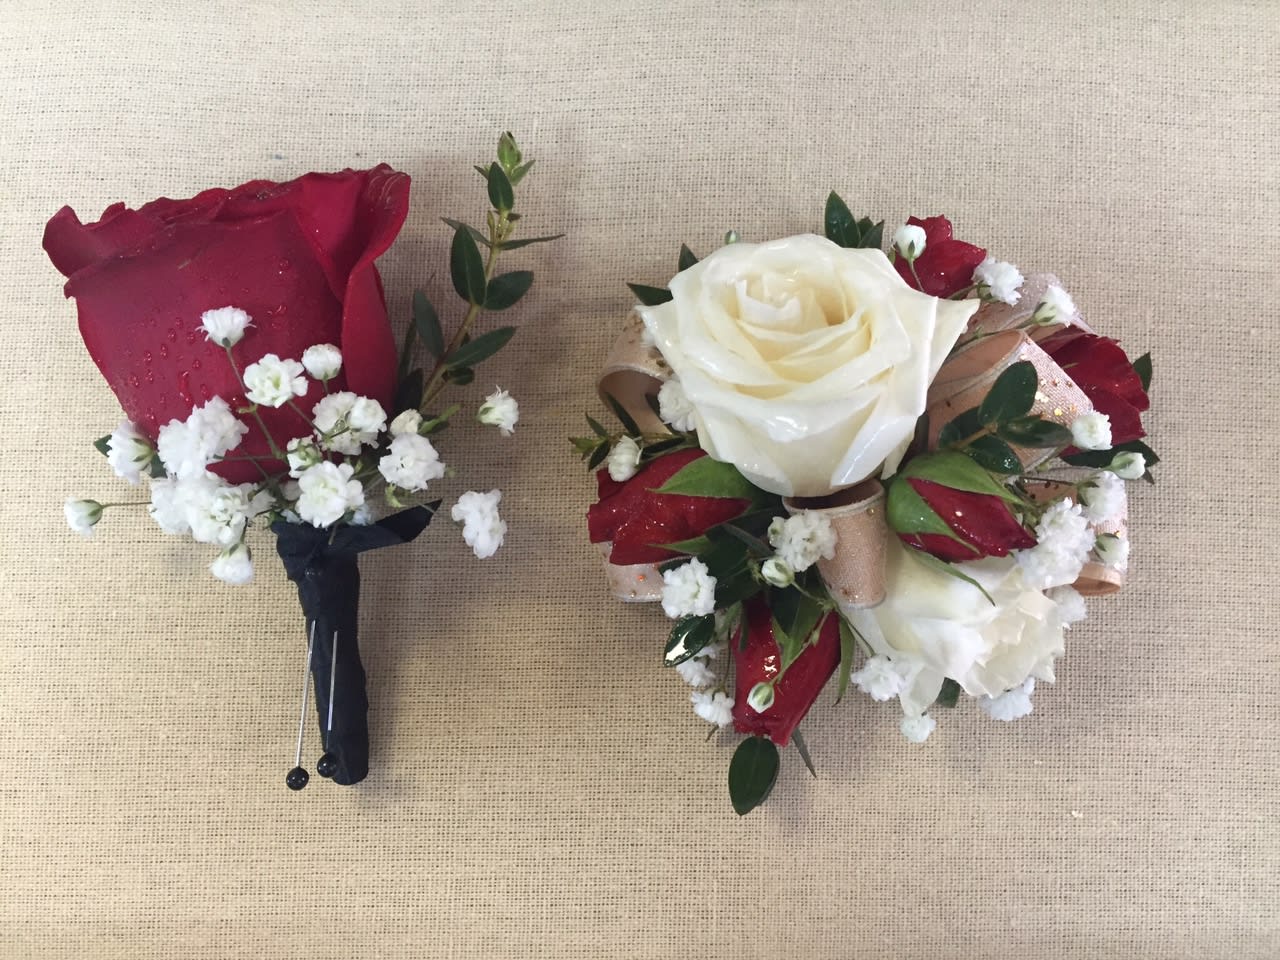 prom corsage with white ribbon and white spray roses with baby's breath